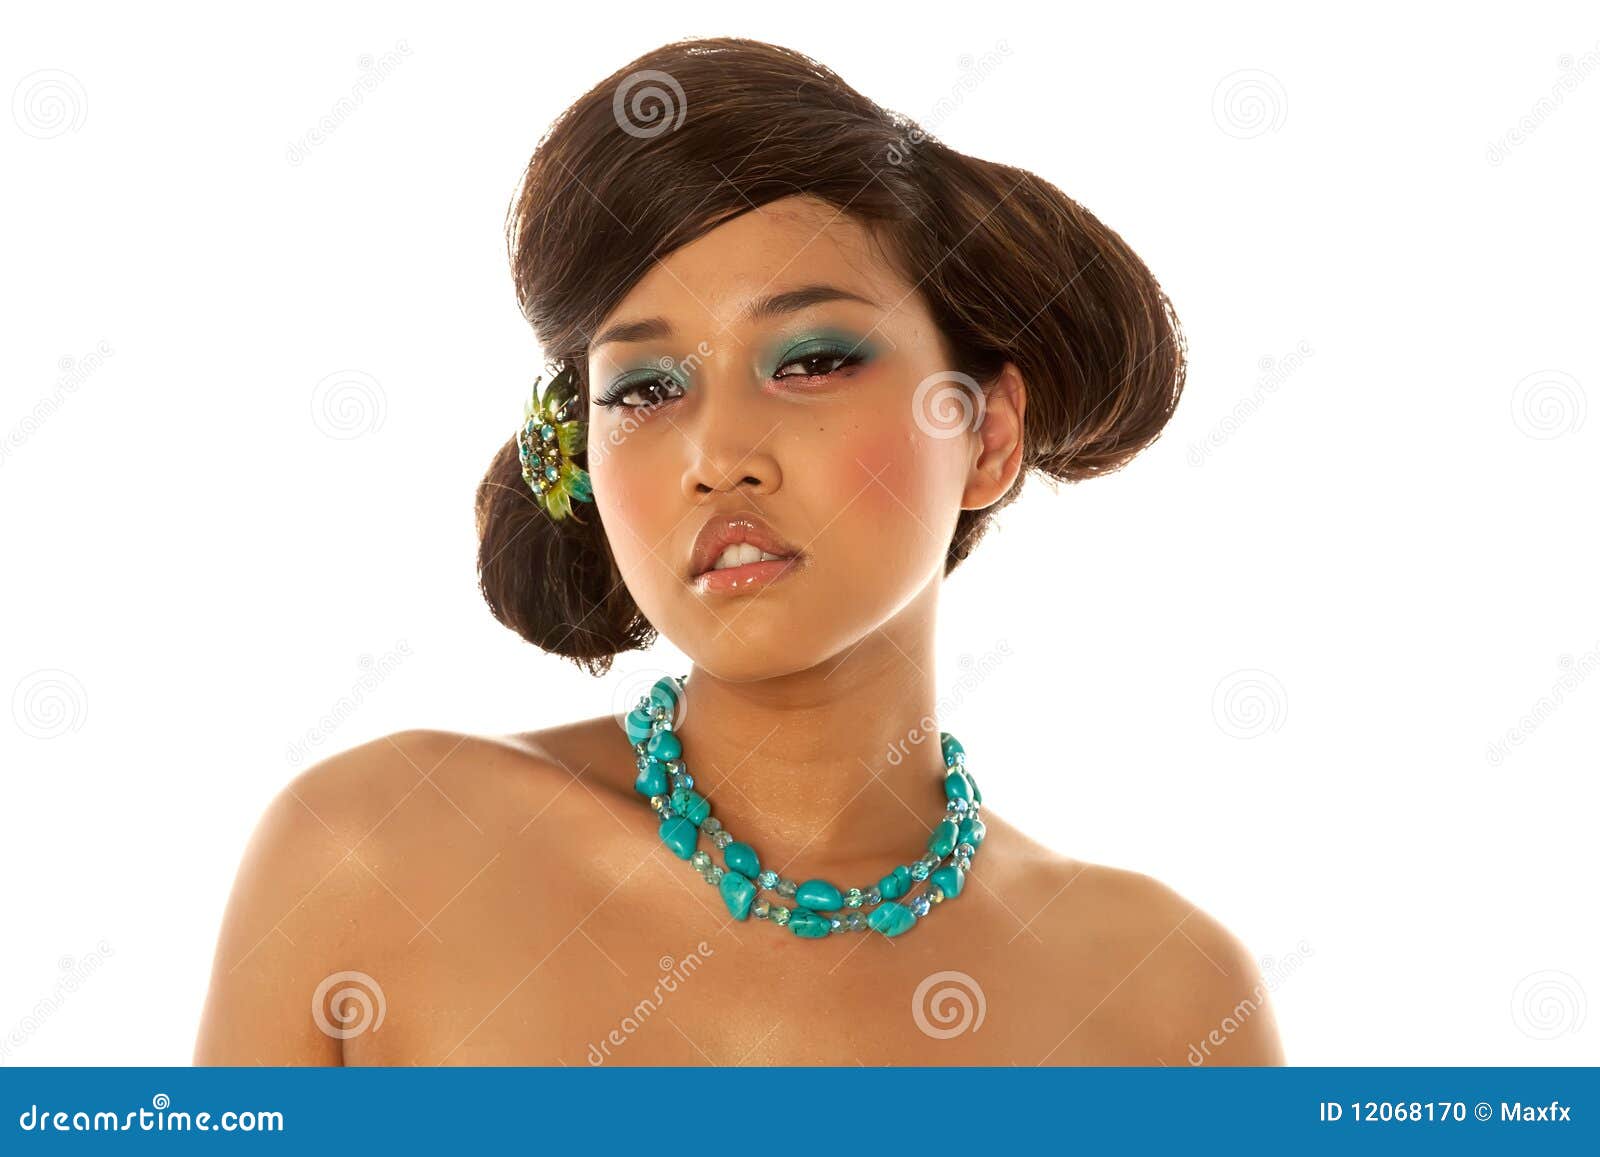 asian girl with hairdo and makeup